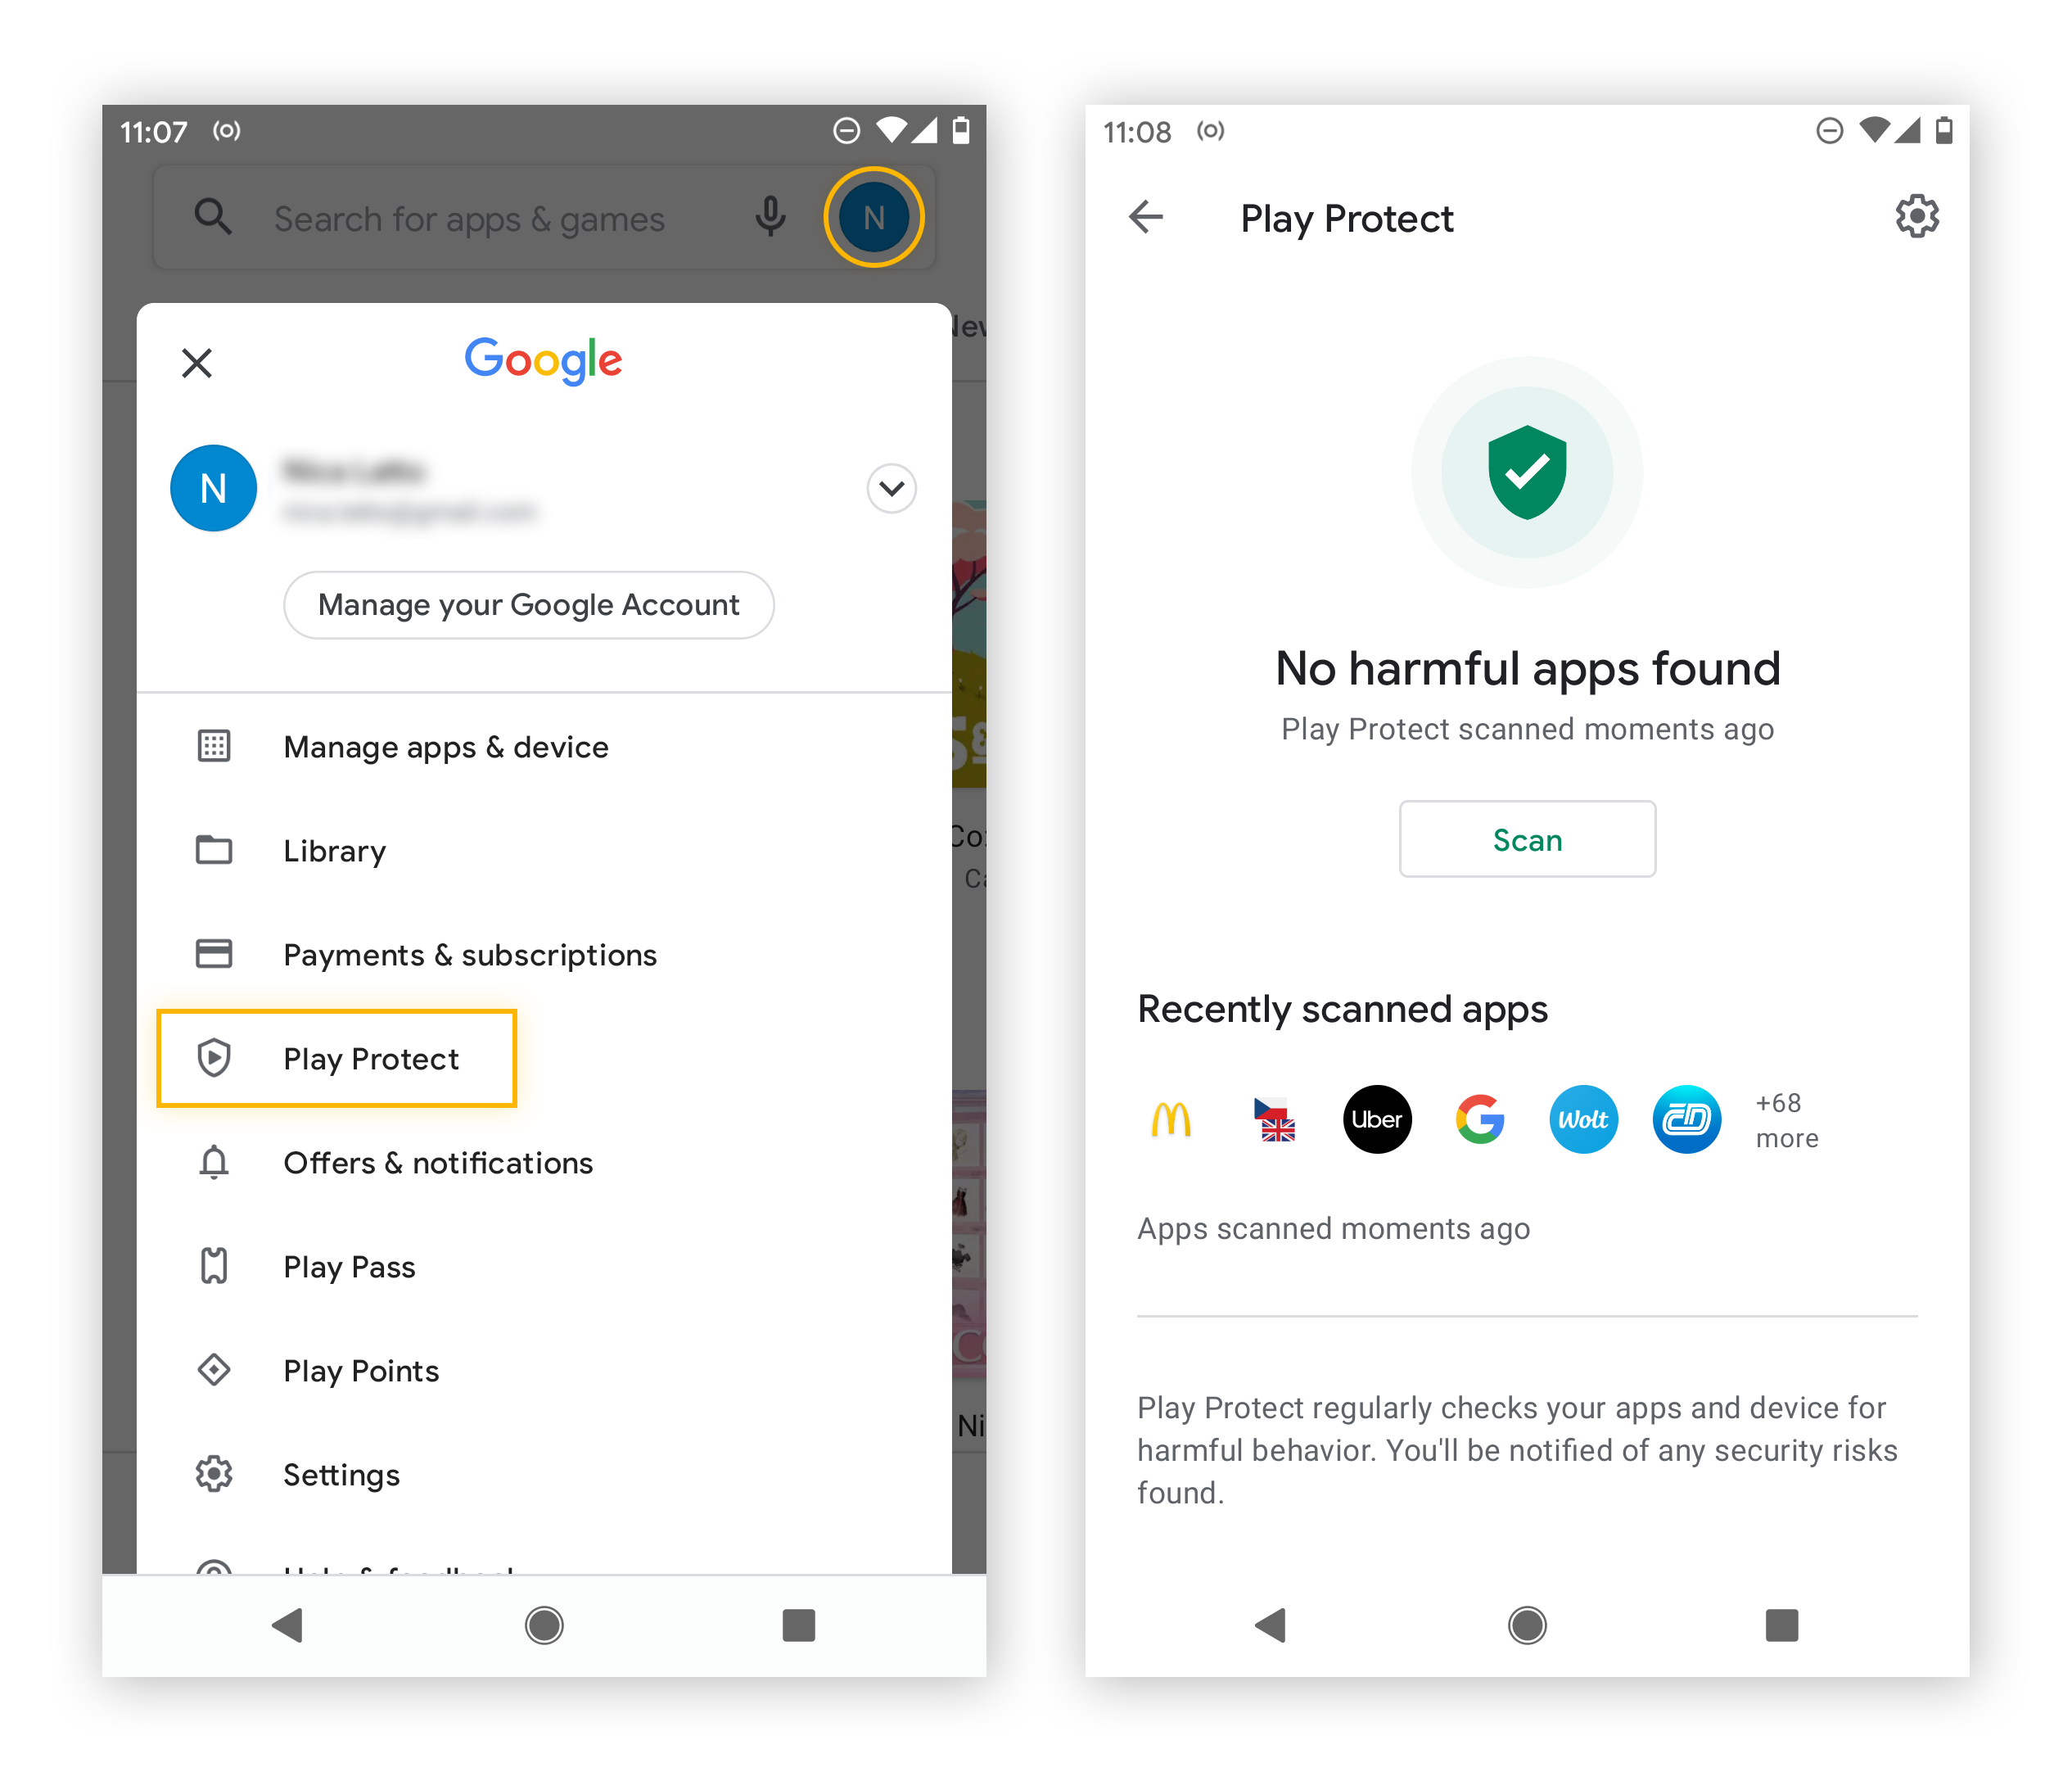 Play Store: Google removes several cleaner apps from Play Store